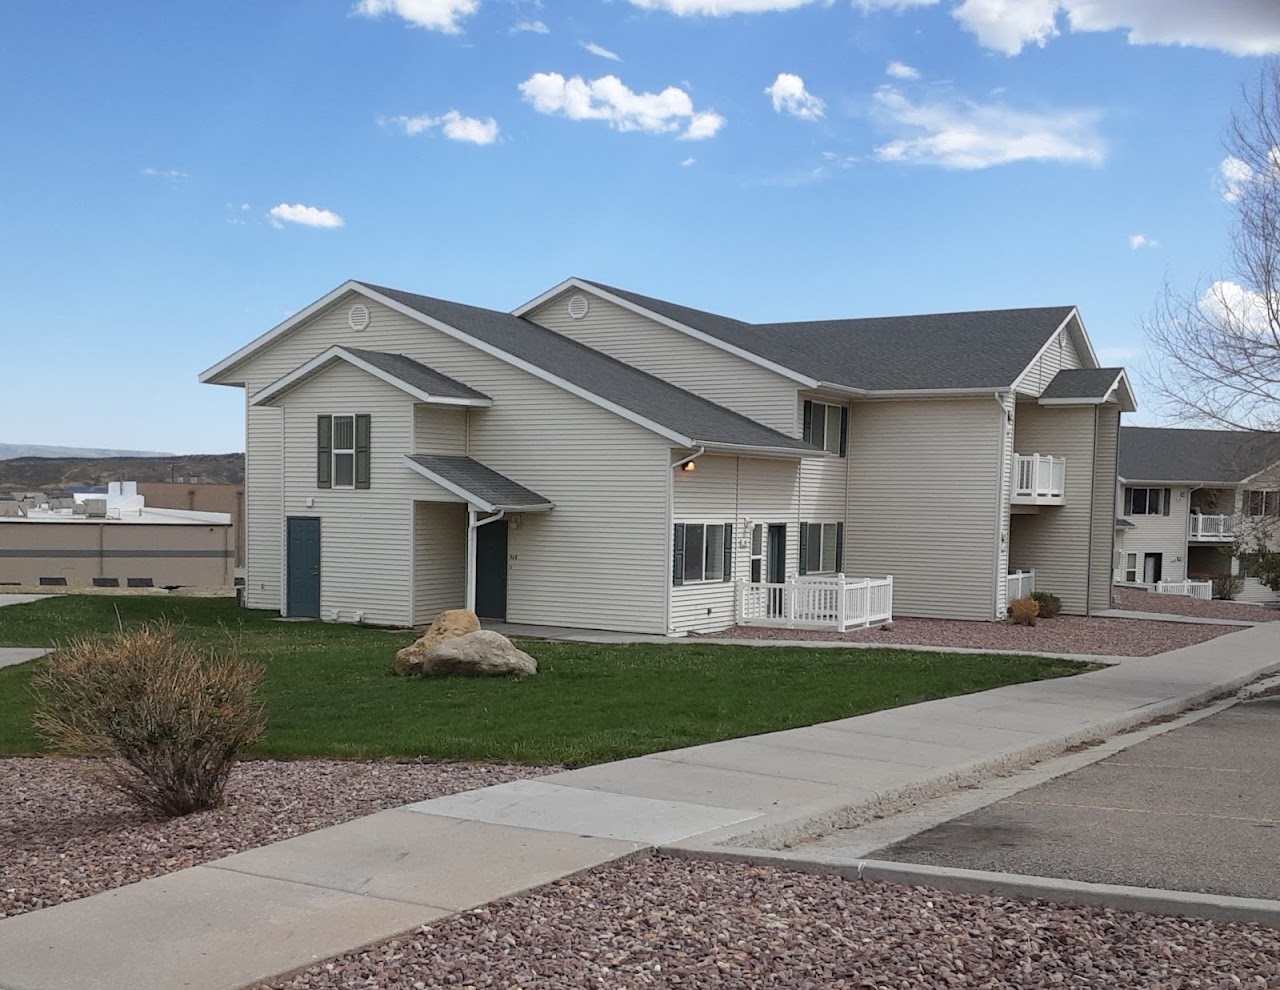 Photo of CARRINGTON POINTE APTS. Affordable housing located at 2475 CASCADE DR ROCK SPRINGS, WY 82901